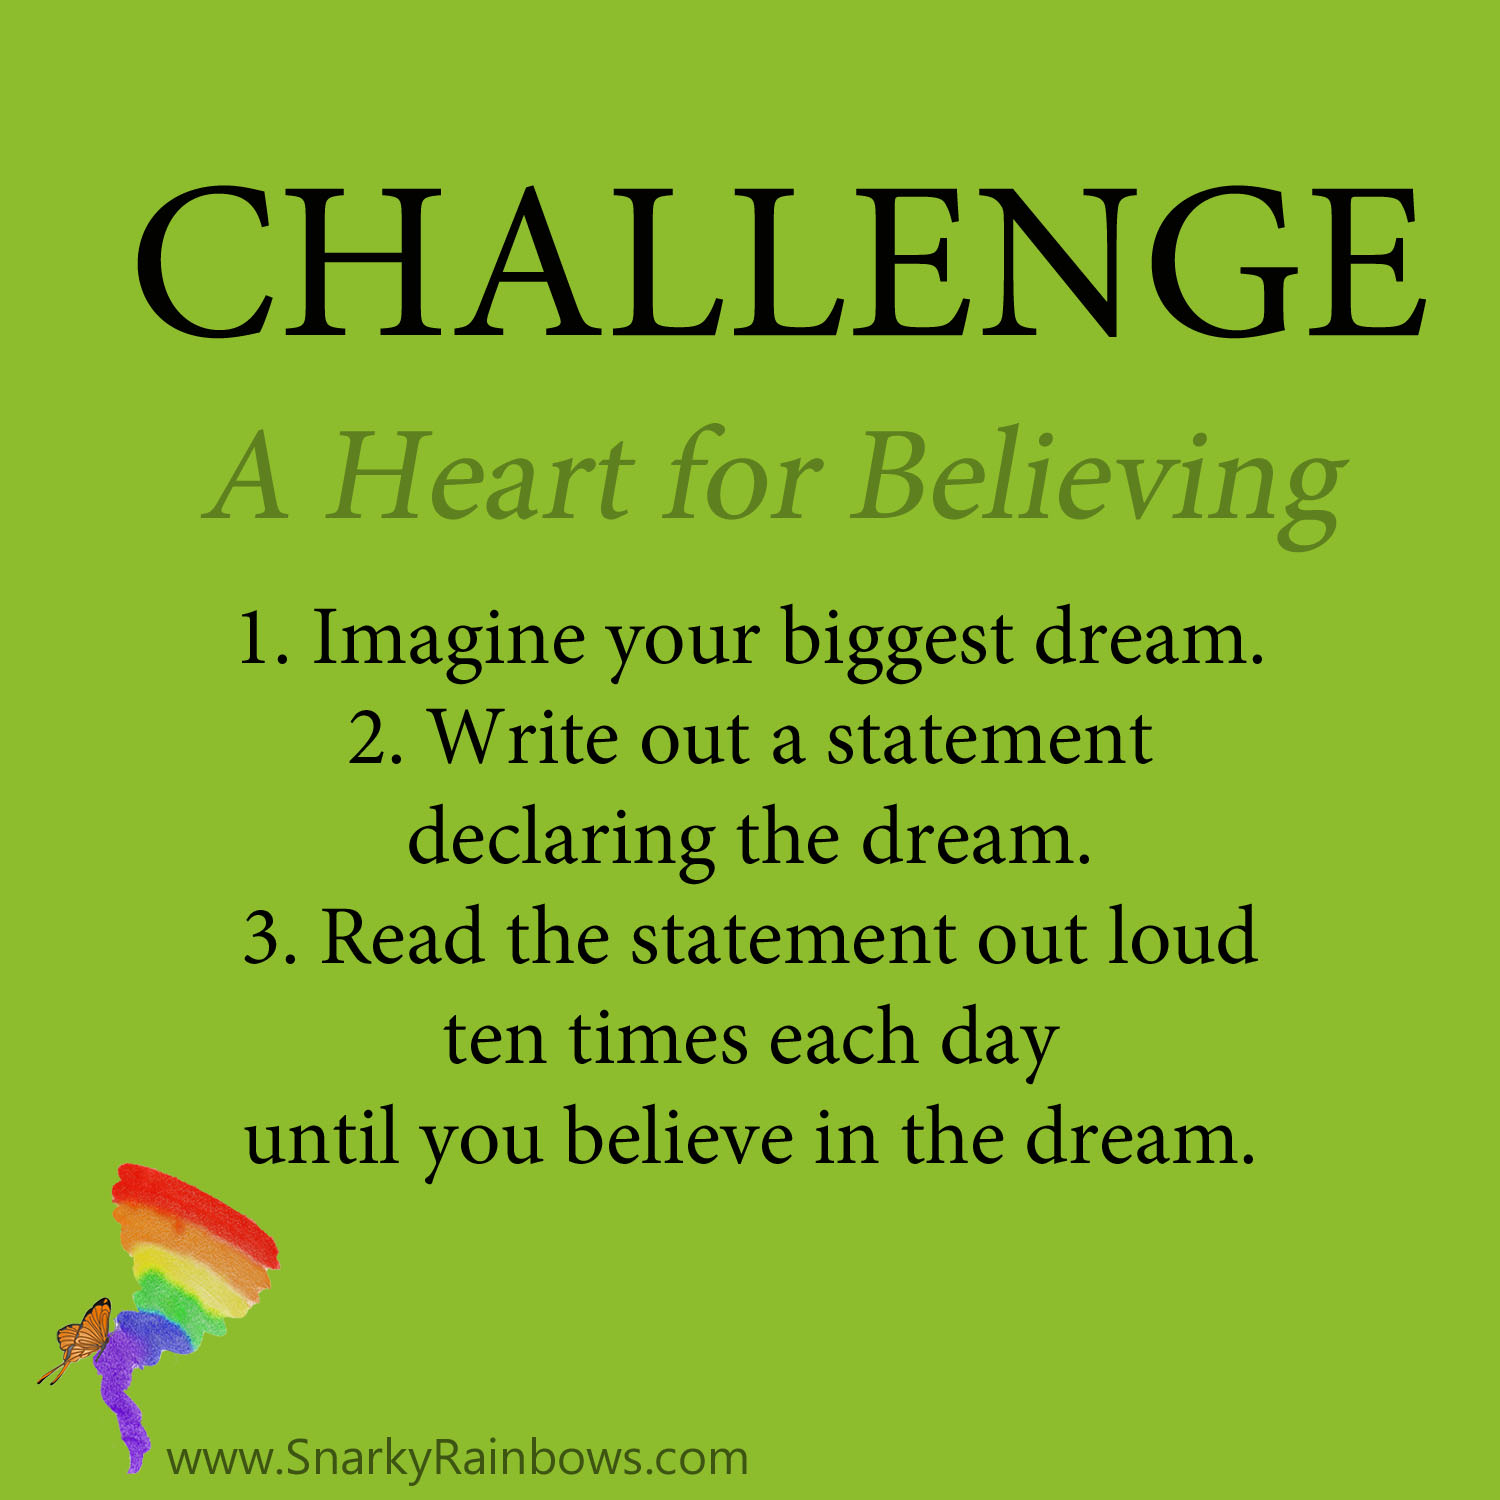 Daily Challenge for December 3, 2019 - heart for believing